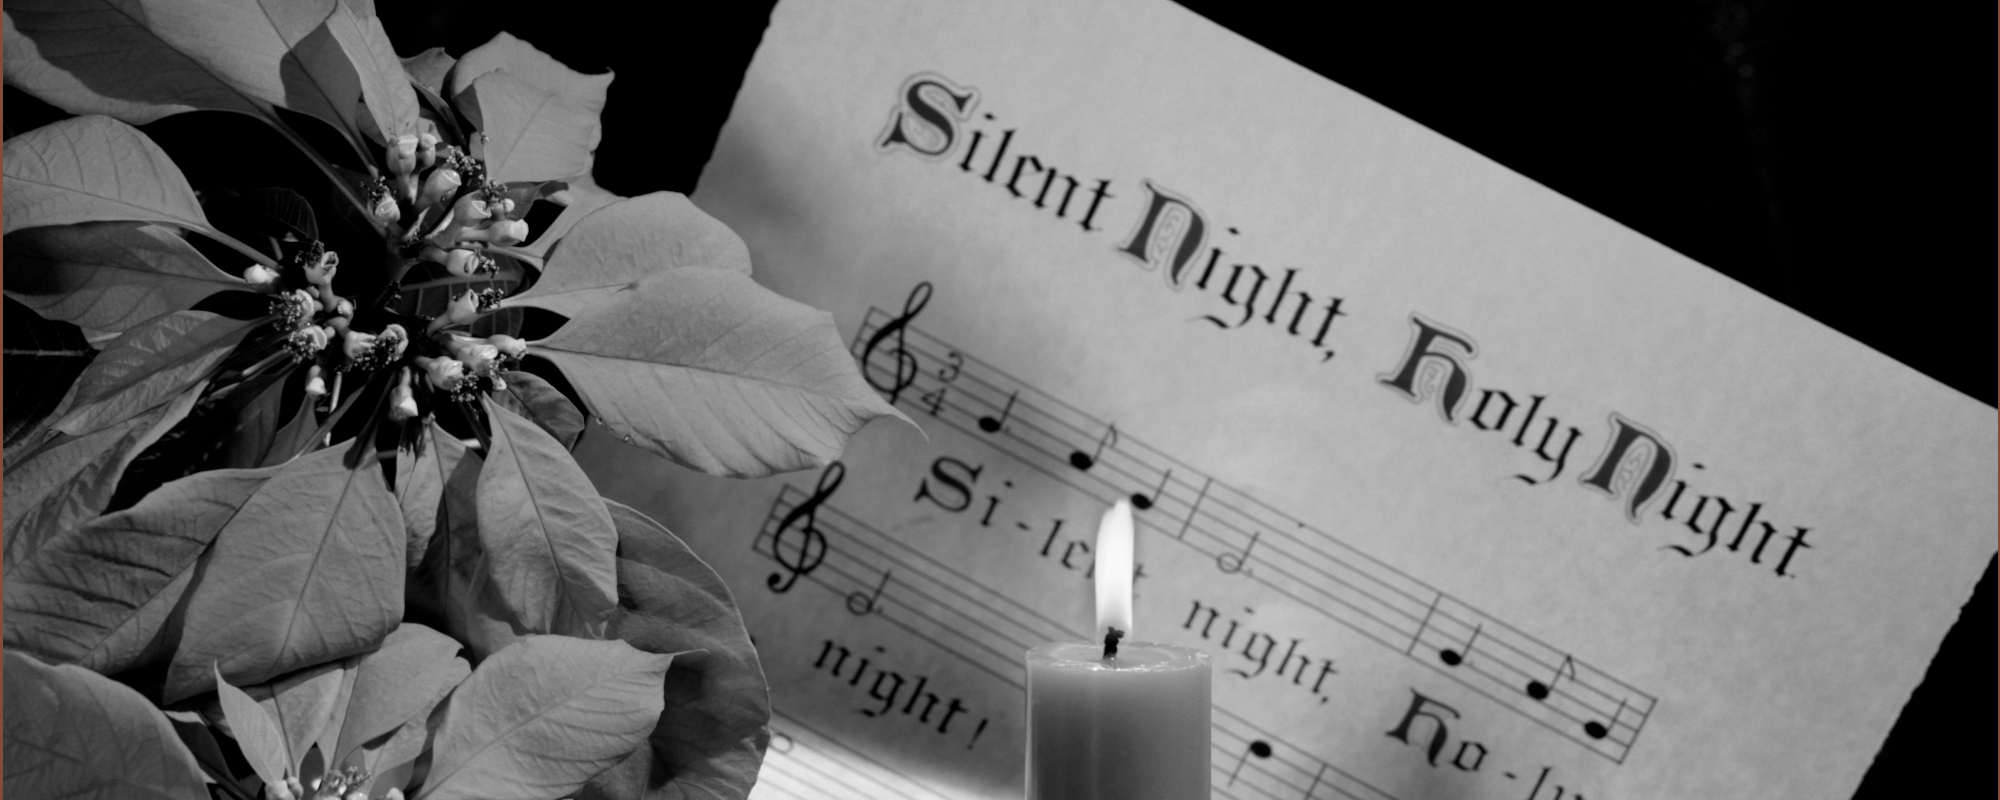 Behind the History and Meaning of the Christmas Carol “Silent Night”